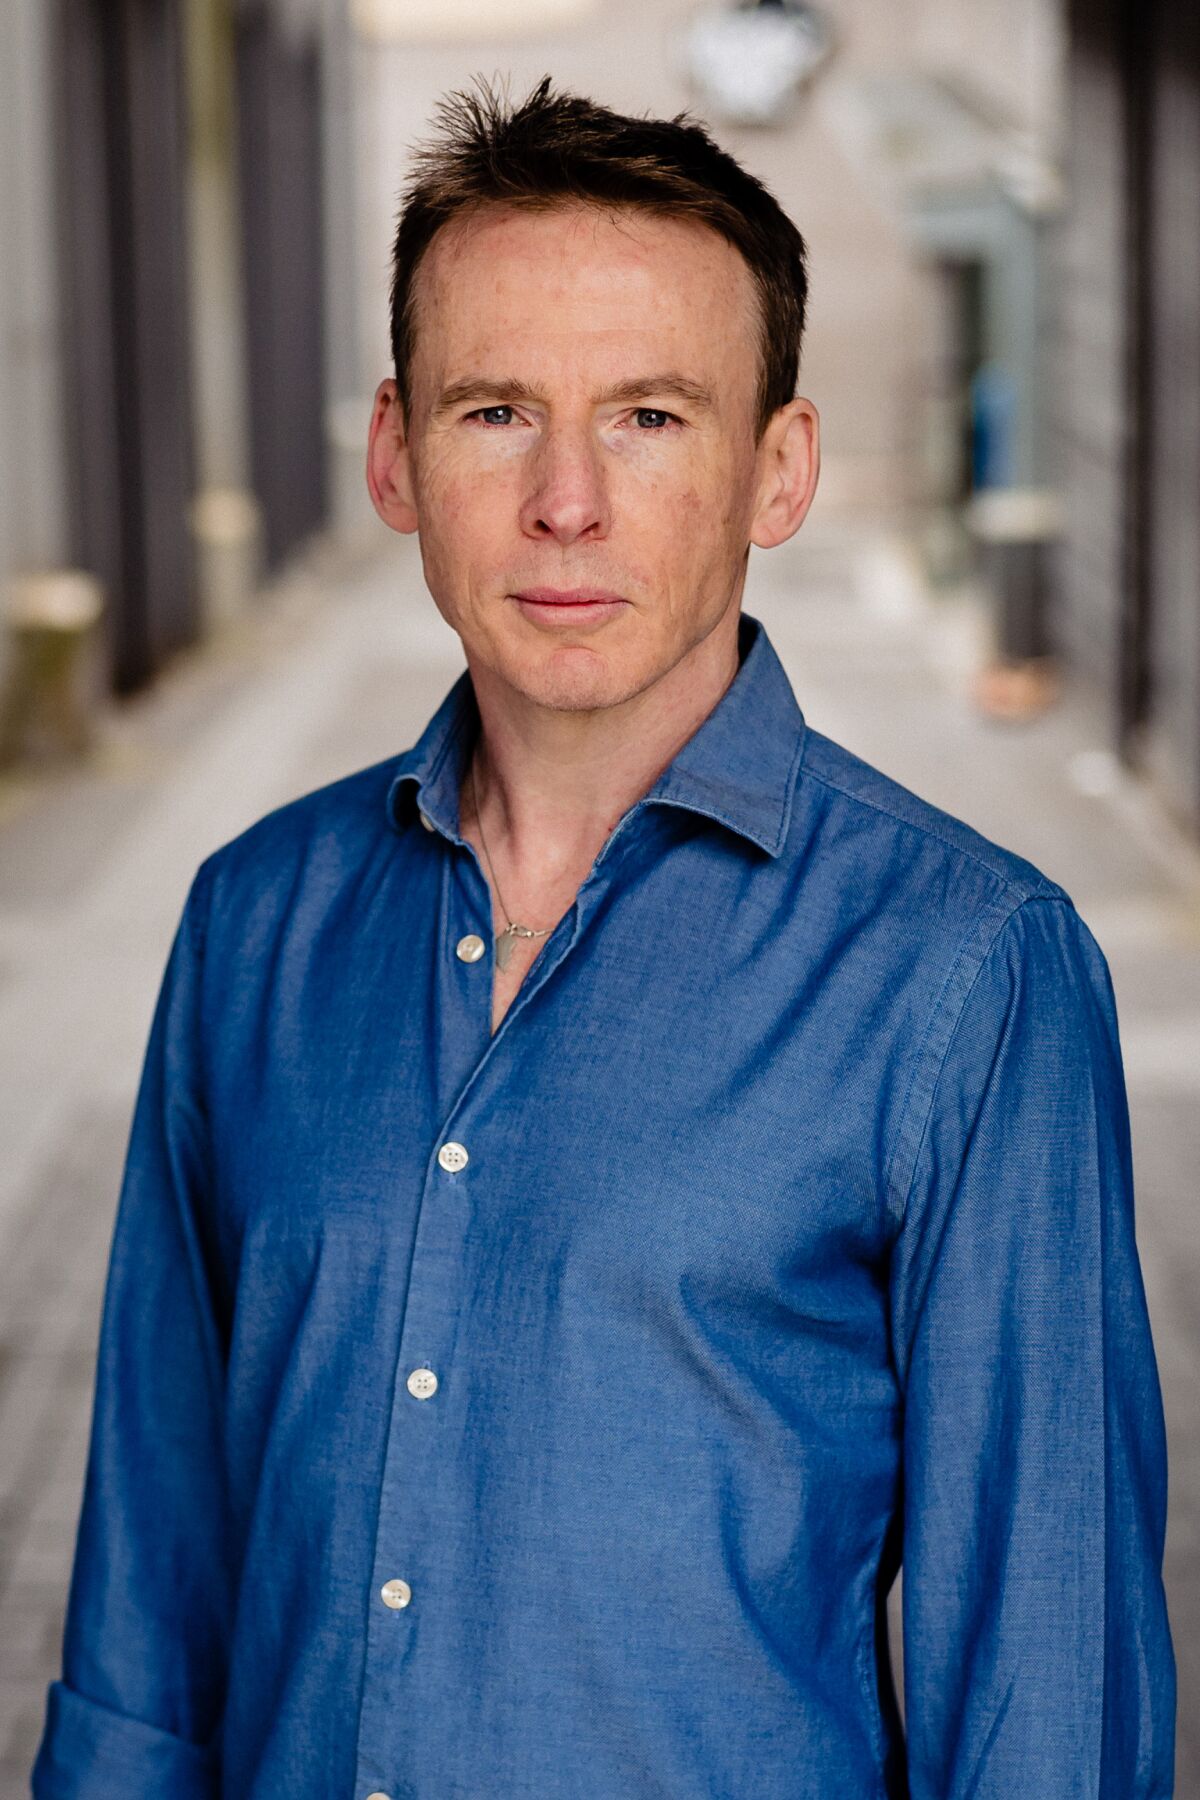 Rory Carroll, an author, in a crisp blue shirt standing in an alley.